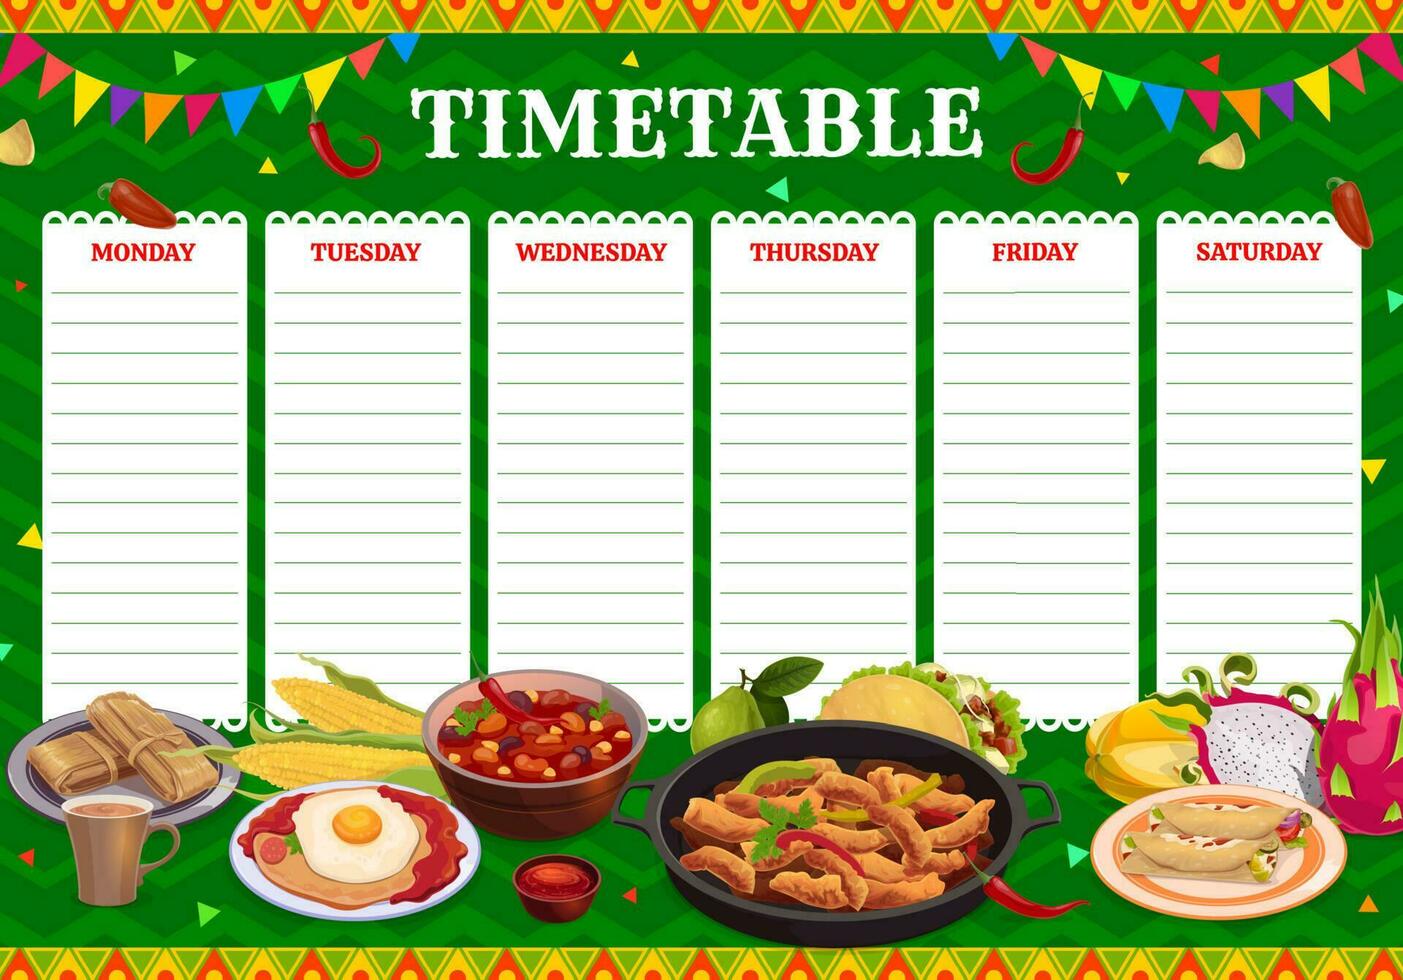 Timetable schedule mexican food, lessons planner vector